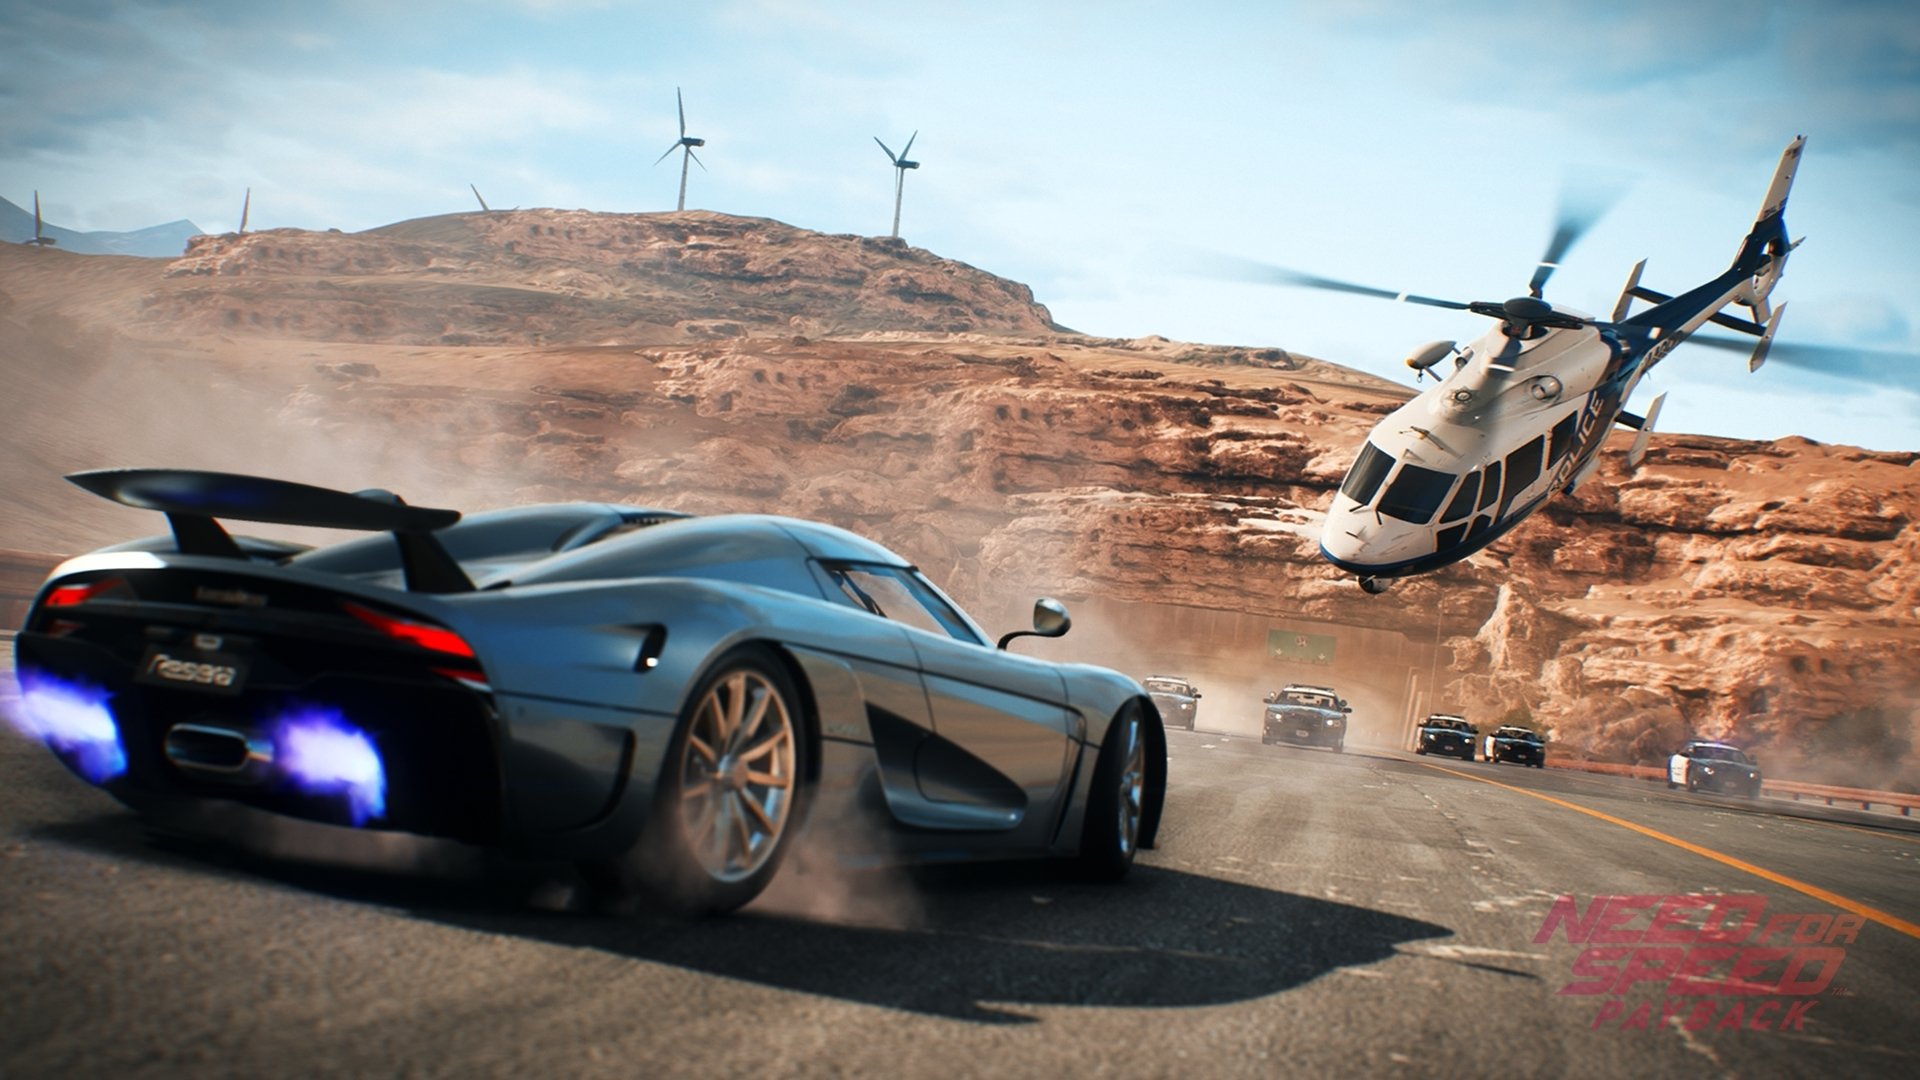 Need For Speed Payback HD Wallpaper Background Image